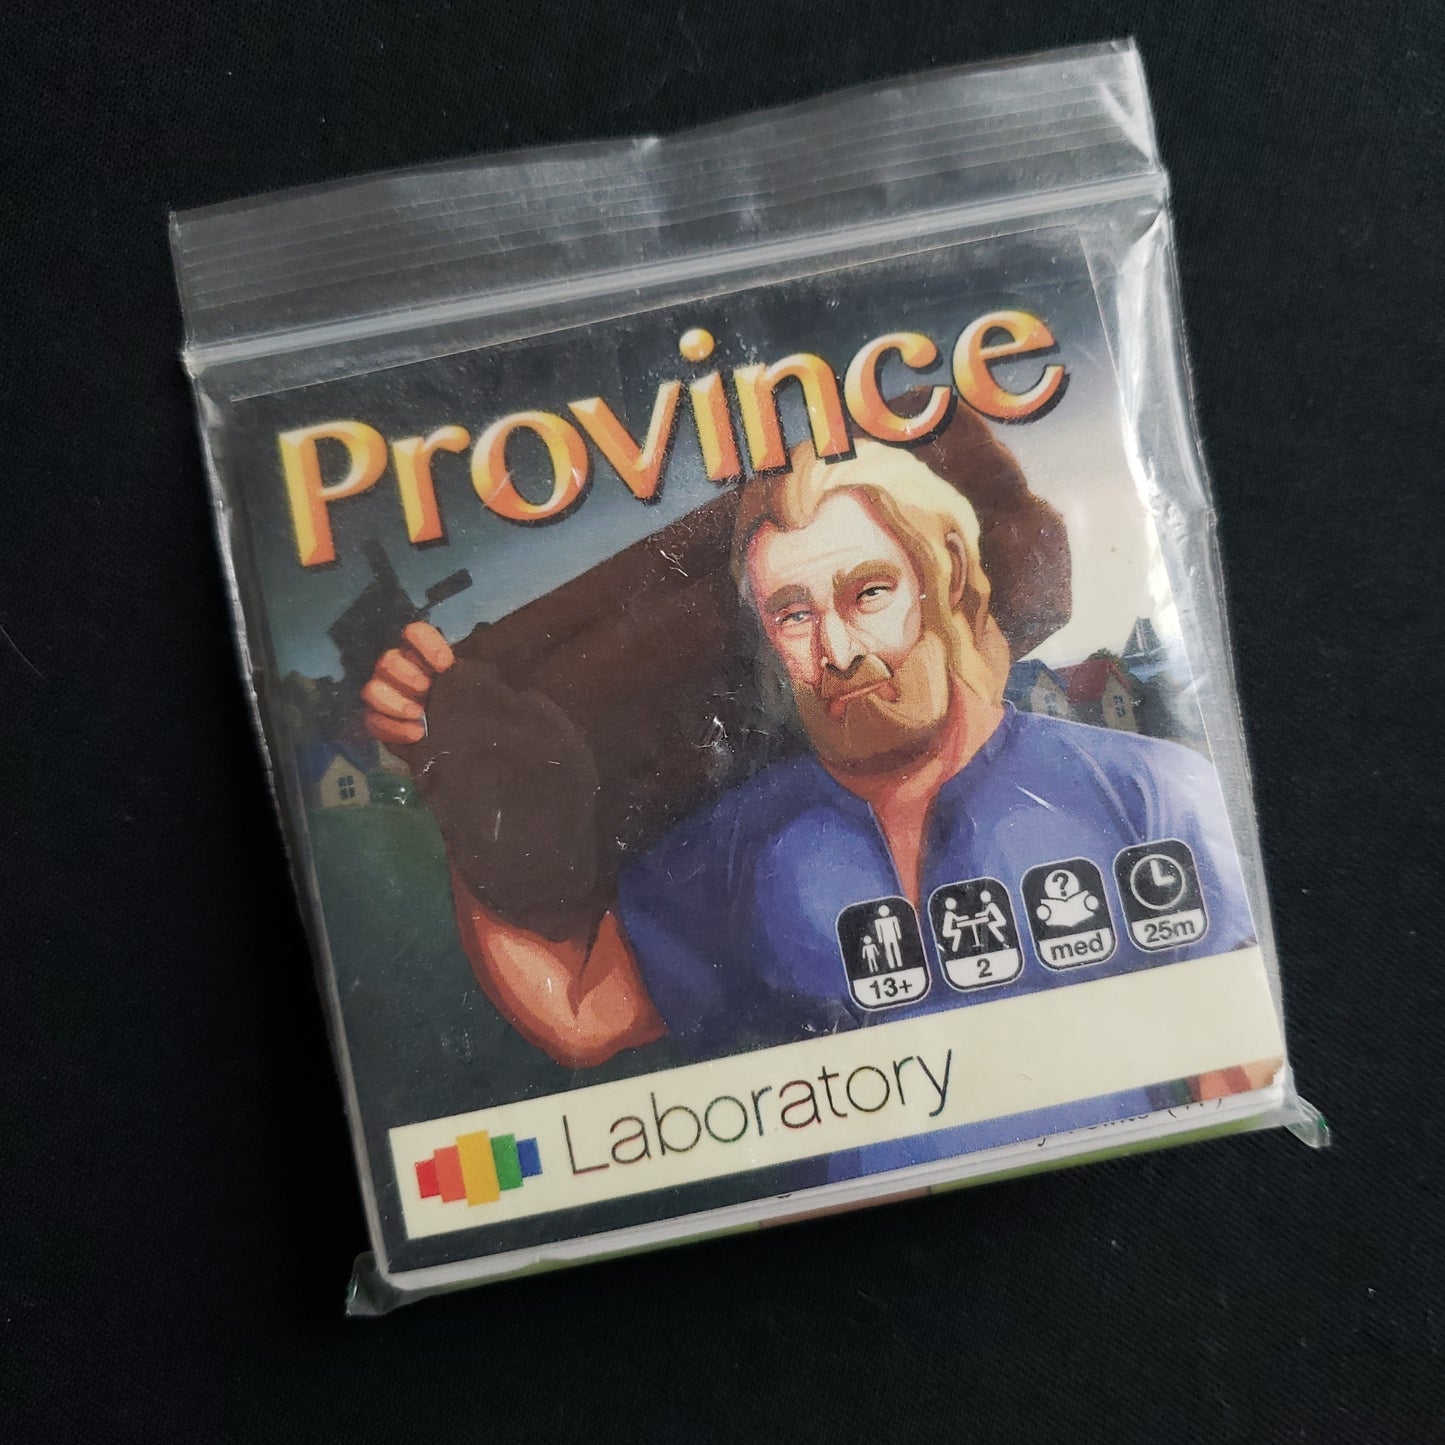 Image shows the front of the package of the Province board game